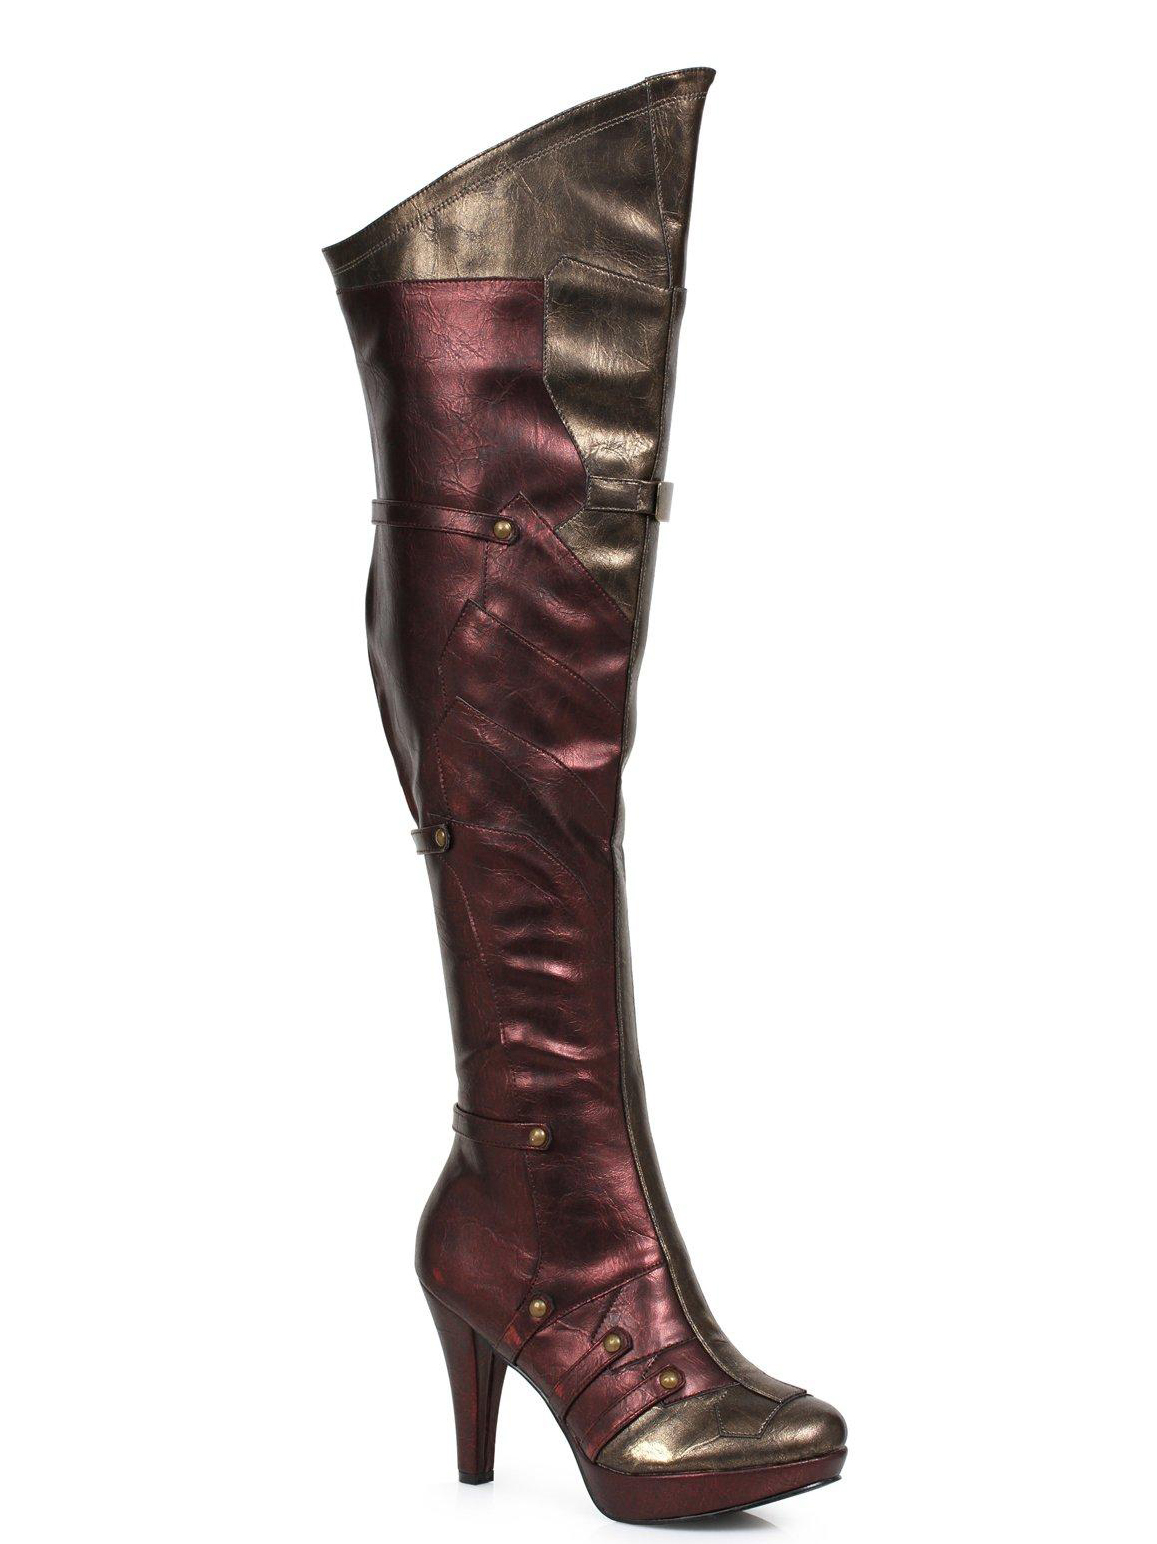 ELLIE SHOES - Women's Thigh High Boots - 8 - image 1 of 2